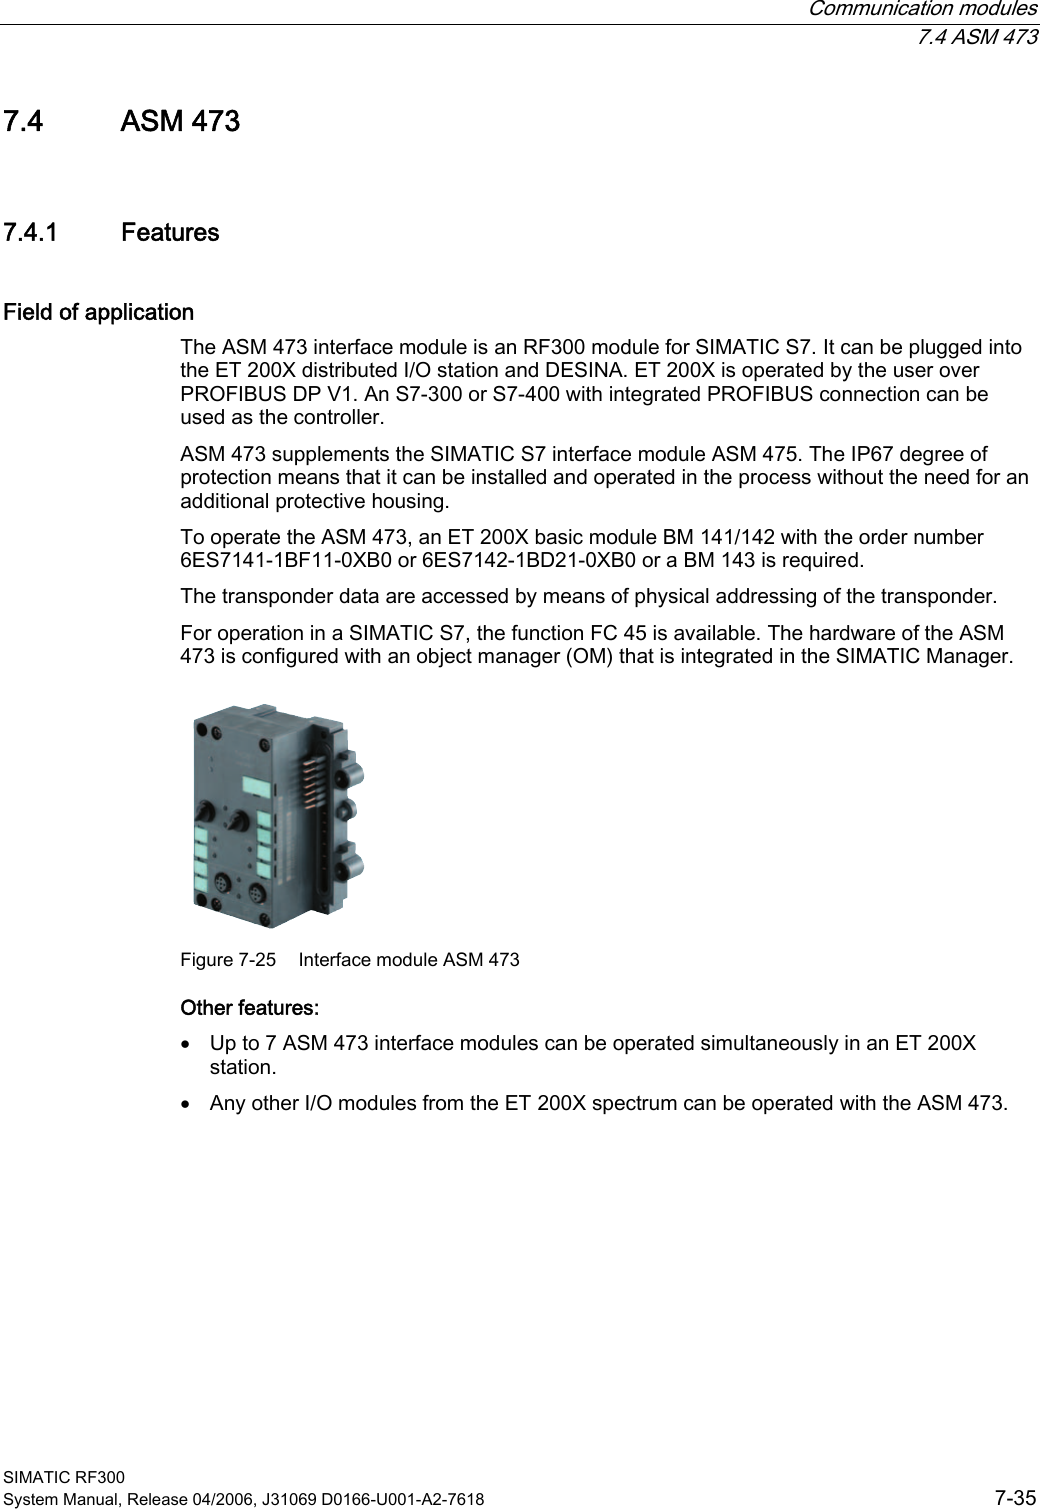  Communication modules  7.4 ASM 473 SIMATIC RF300 System Manual, Release 04/2006, J31069 D0166-U001-A2-7618  7-35 7.4 7.4 ASM 473 7.4.1  Features Field of application The ASM 473 interface module is an RF300 module for SIMATIC S7. It can be plugged into the ET 200X distributed I/O station and DESINA. ET 200X is operated by the user over PROFIBUS DP V1. An S7-300 or S7-400 with integrated PROFIBUS connection can be used as the controller.  ASM 473 supplements the SIMATIC S7 interface module ASM 475. The IP67 degree of protection means that it can be installed and operated in the process without the need for an additional protective housing. To operate the ASM 473, an ET 200X basic module BM 141/142 with the order number 6ES7141-1BF11-0XB0 or 6ES7142-1BD21-0XB0 or a BM 143 is required. The transponder data are accessed by means of physical addressing of the transponder. For operation in a SIMATIC S7, the function FC 45 is available. The hardware of the ASM 473 is configured with an object manager (OM) that is integrated in the SIMATIC Manager.  Figure 7-25  Interface module ASM 473 Other features: • Up to 7 ASM 473 interface modules can be operated simultaneously in an ET 200X station. • Any other I/O modules from the ET 200X spectrum can be operated with the ASM 473. 